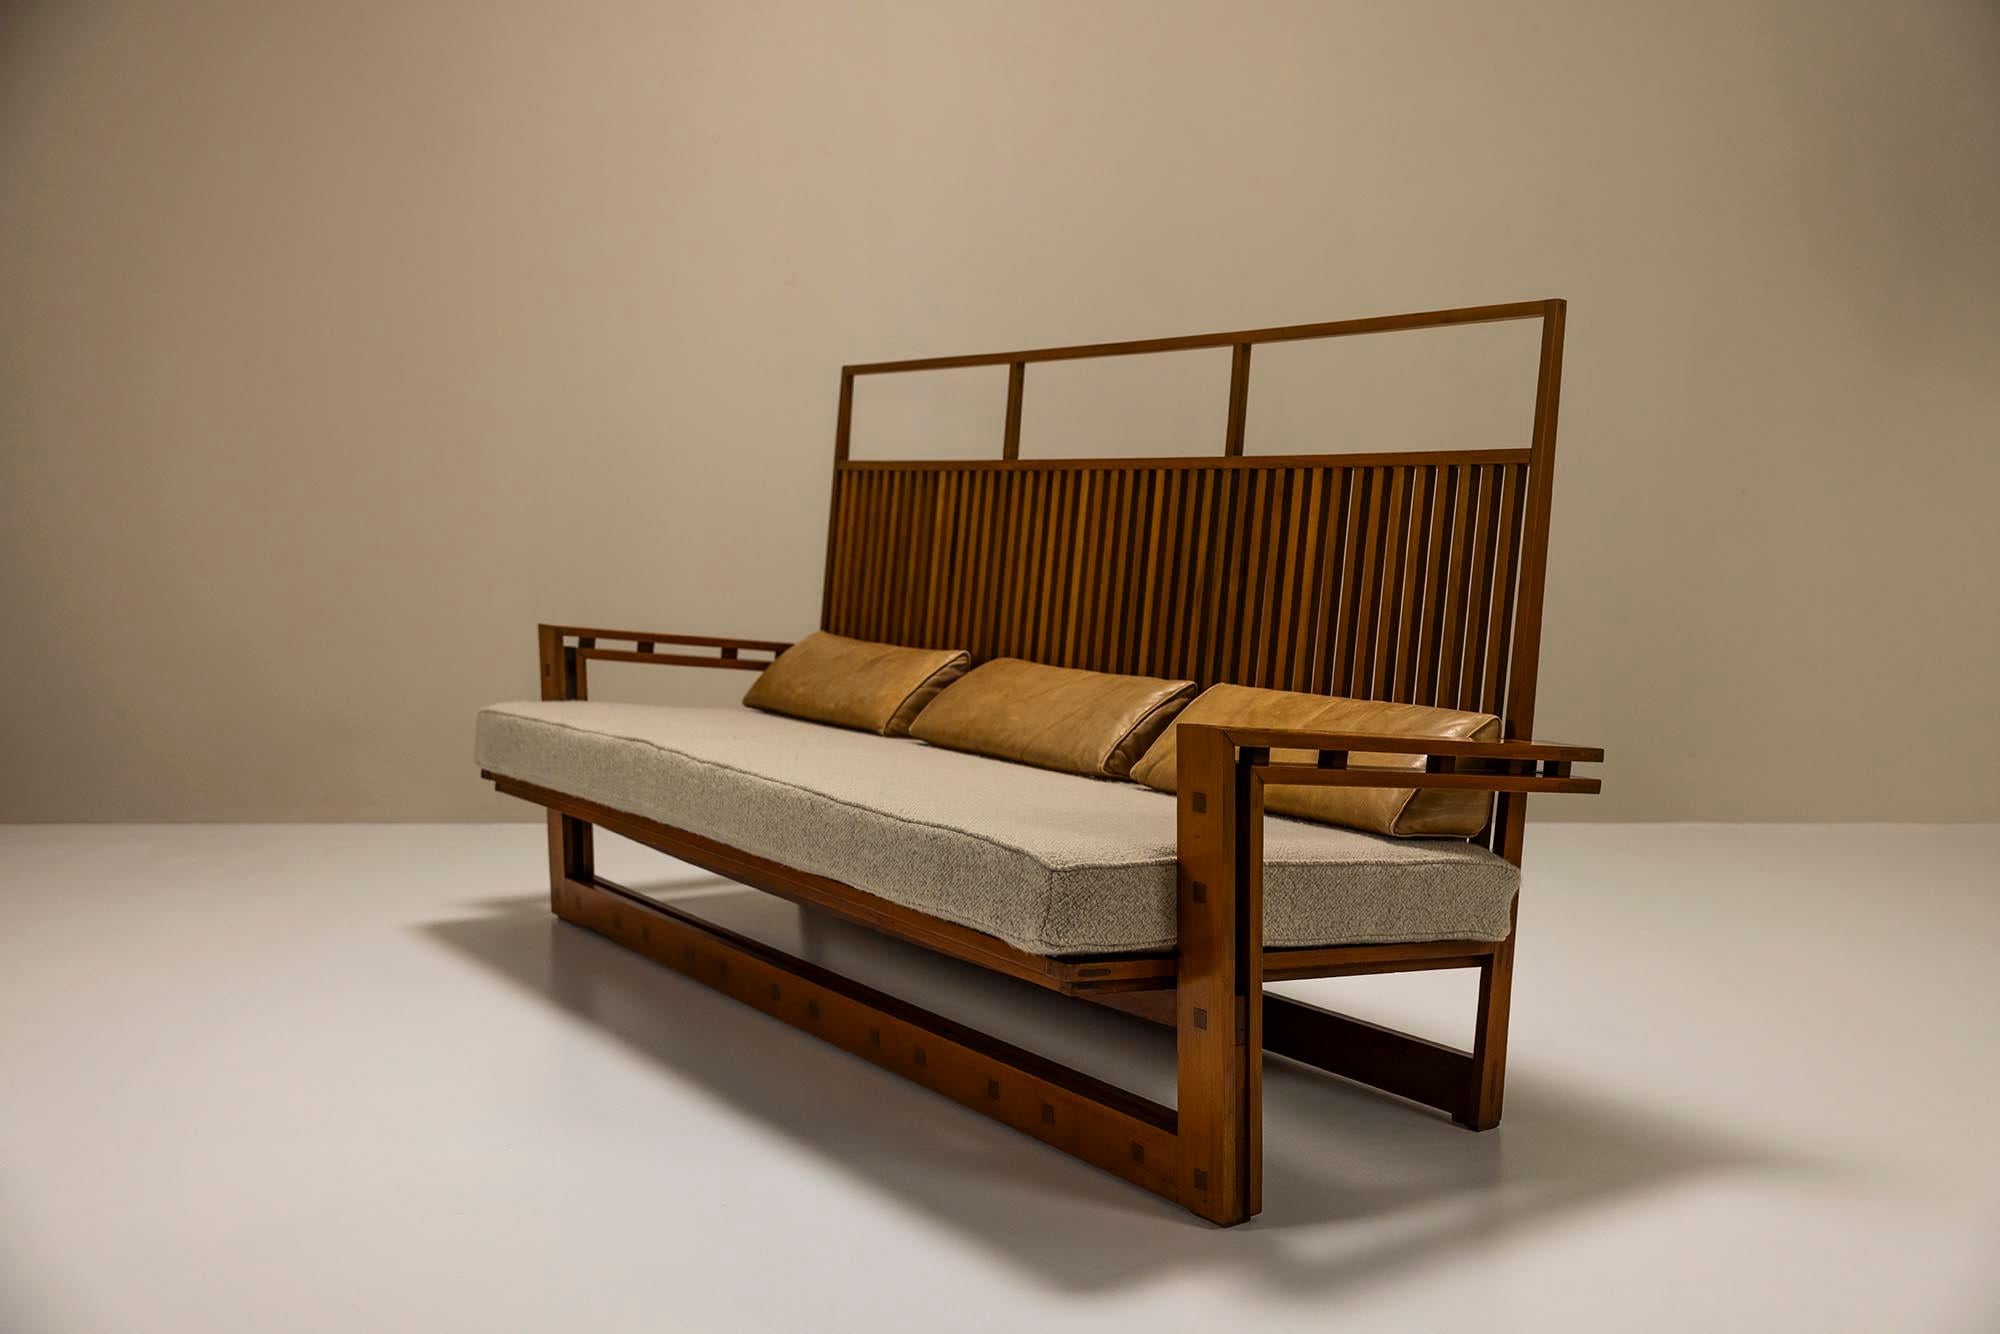 Three Seater Sofa In Solid Ash And Mansonia Wood By Fausto Bontempi, Italy 1961 For Sale 1